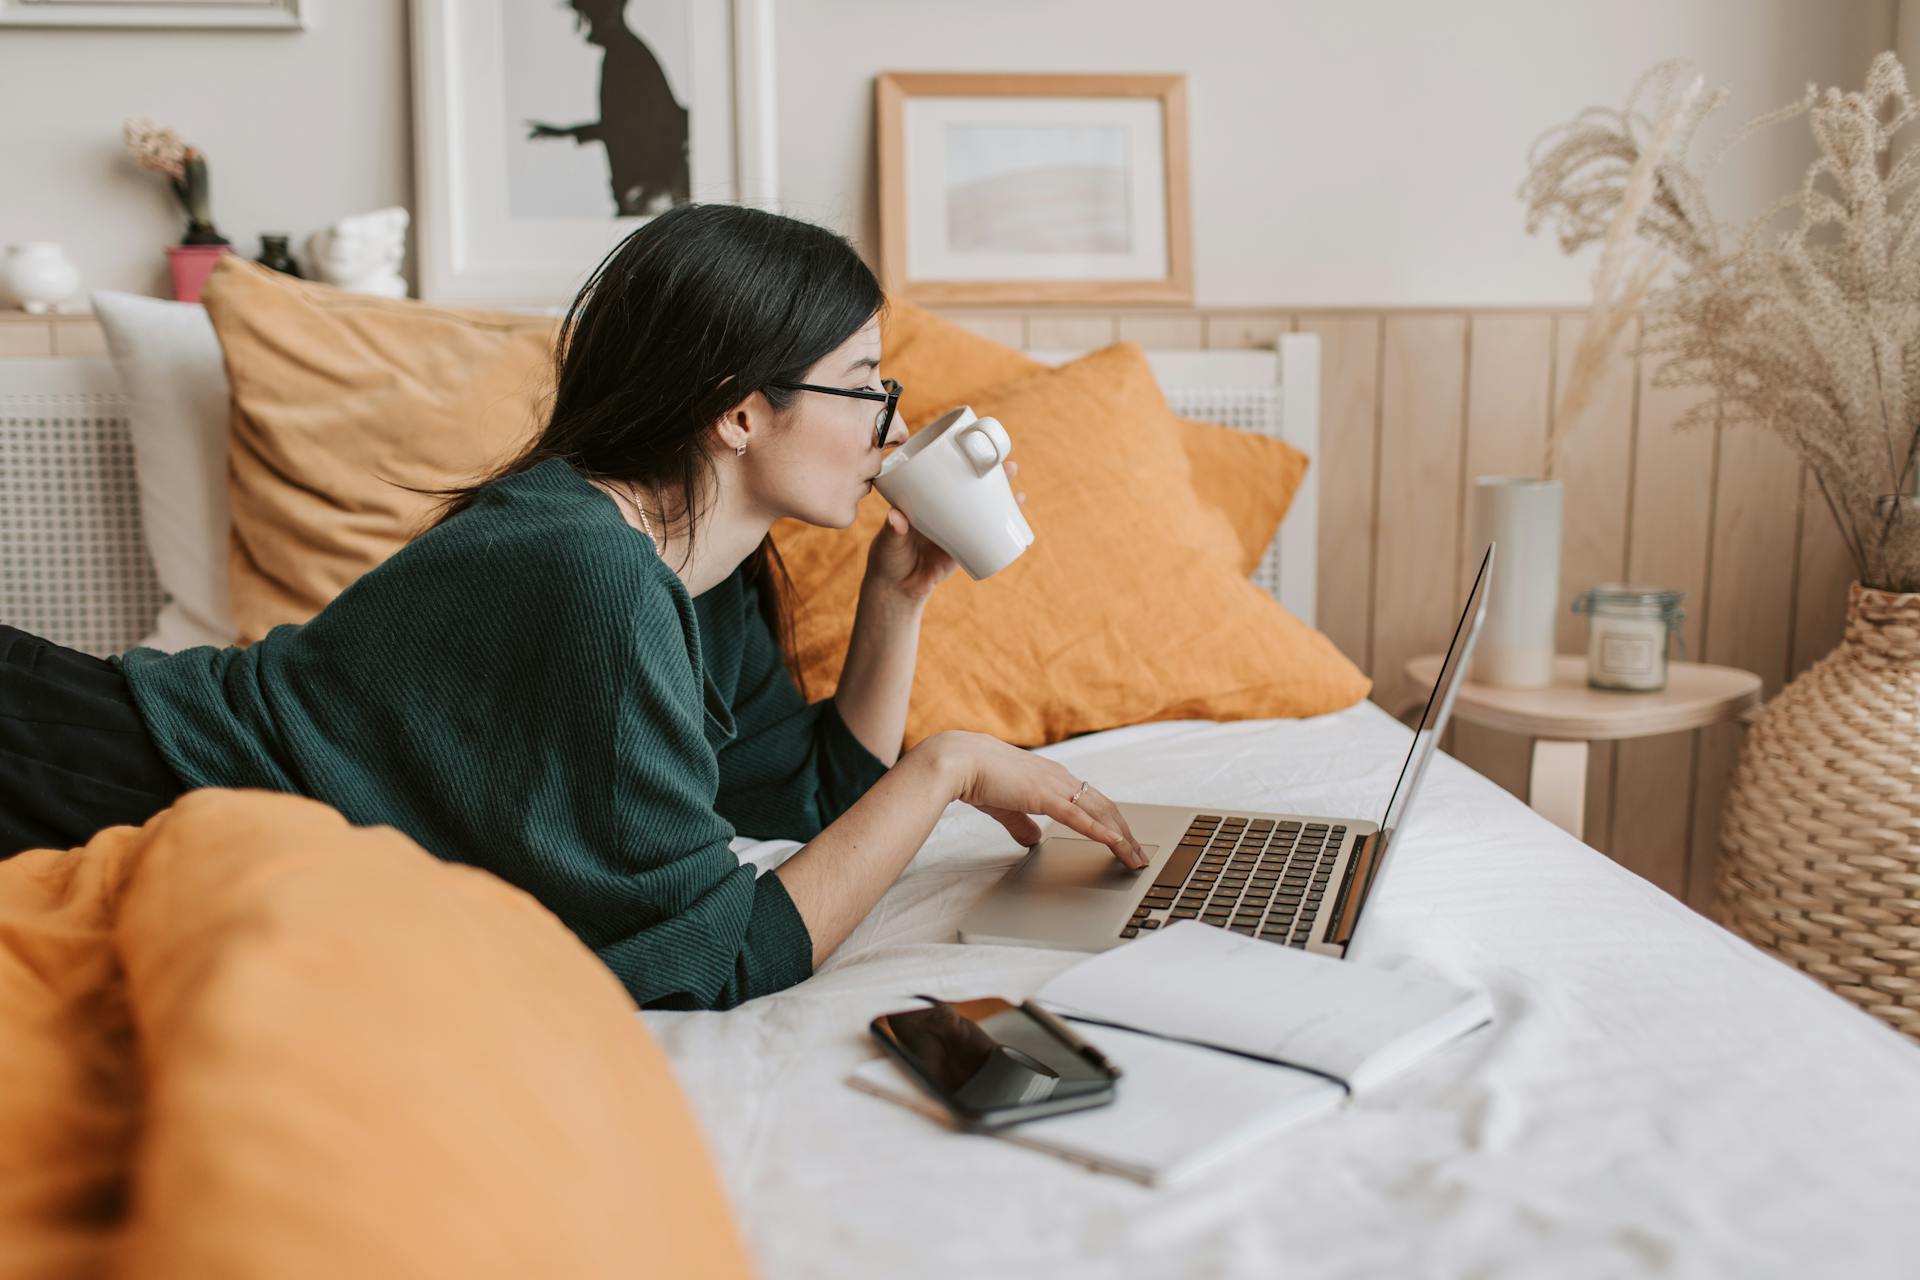 A woman using laptop in bed | Source: Pexels